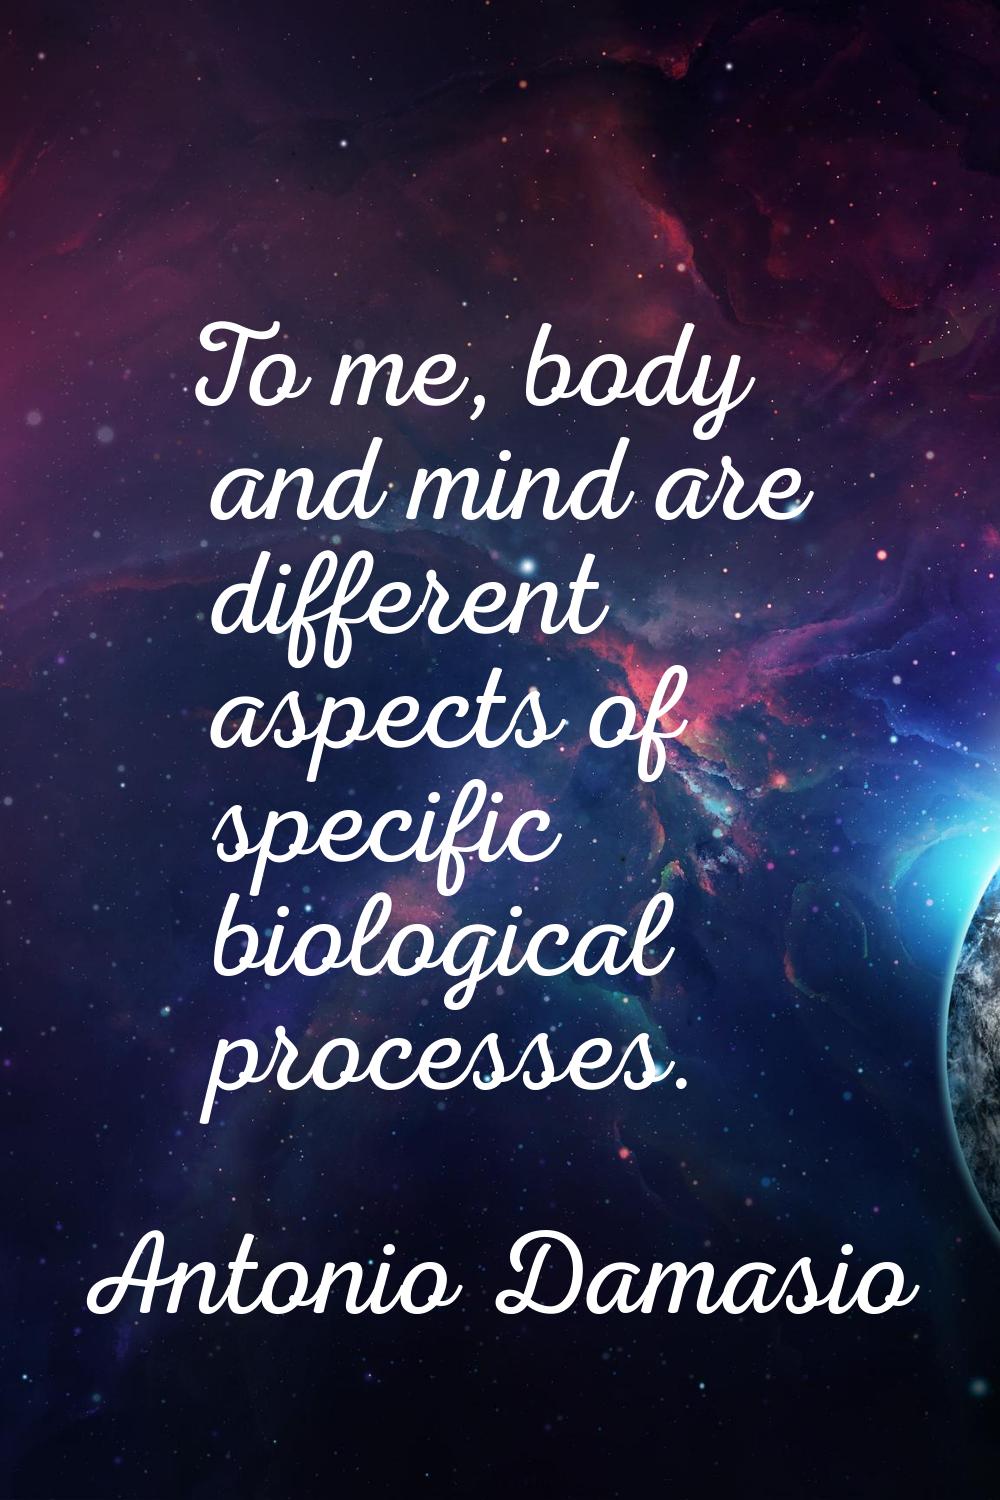 To me, body and mind are different aspects of specific biological processes.